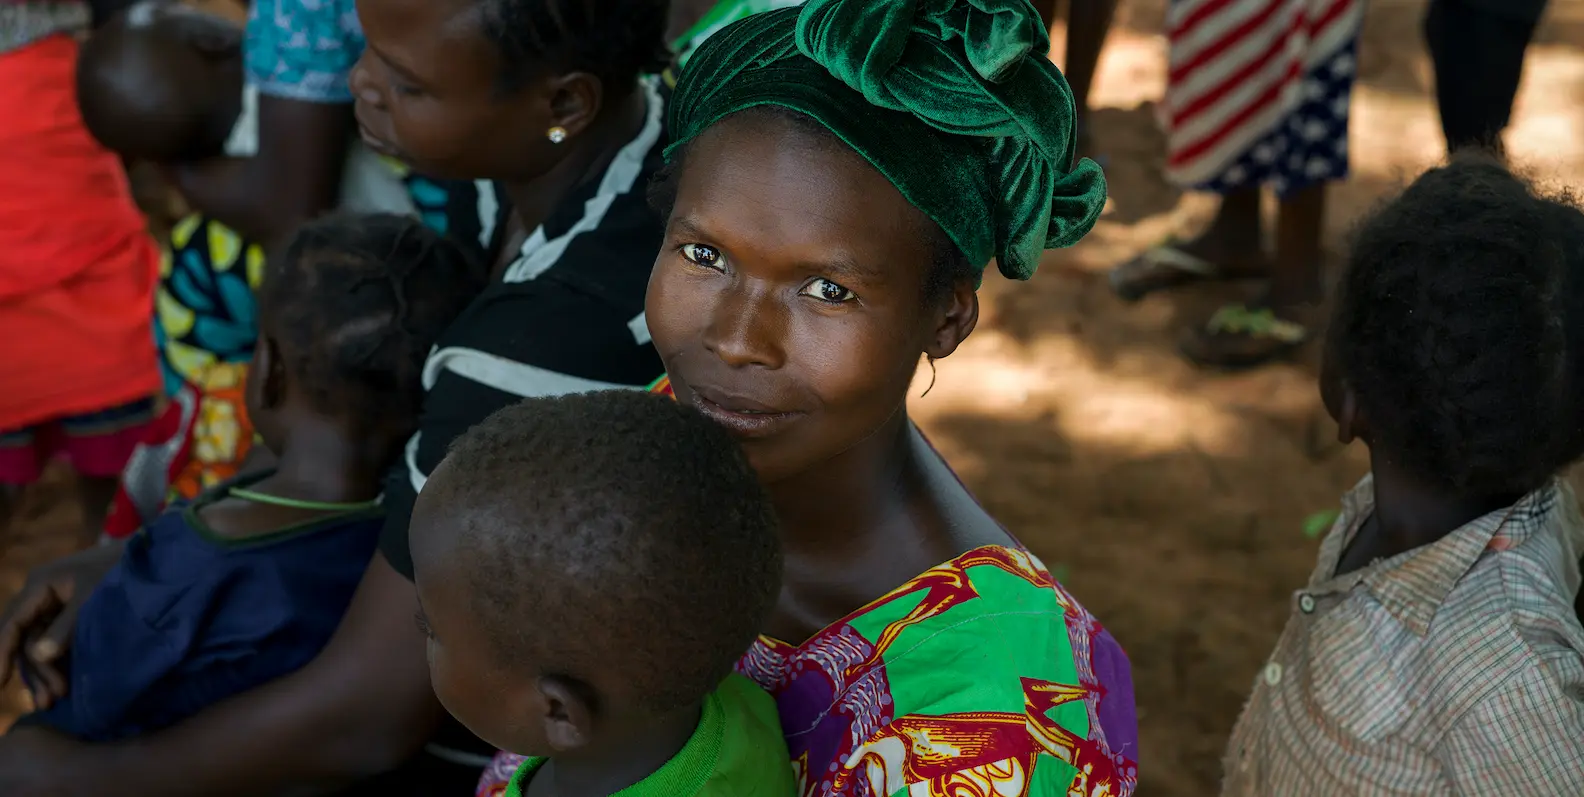 An attendee at one of Concern’s mobile maternal and childhood health units in Central African Republic.